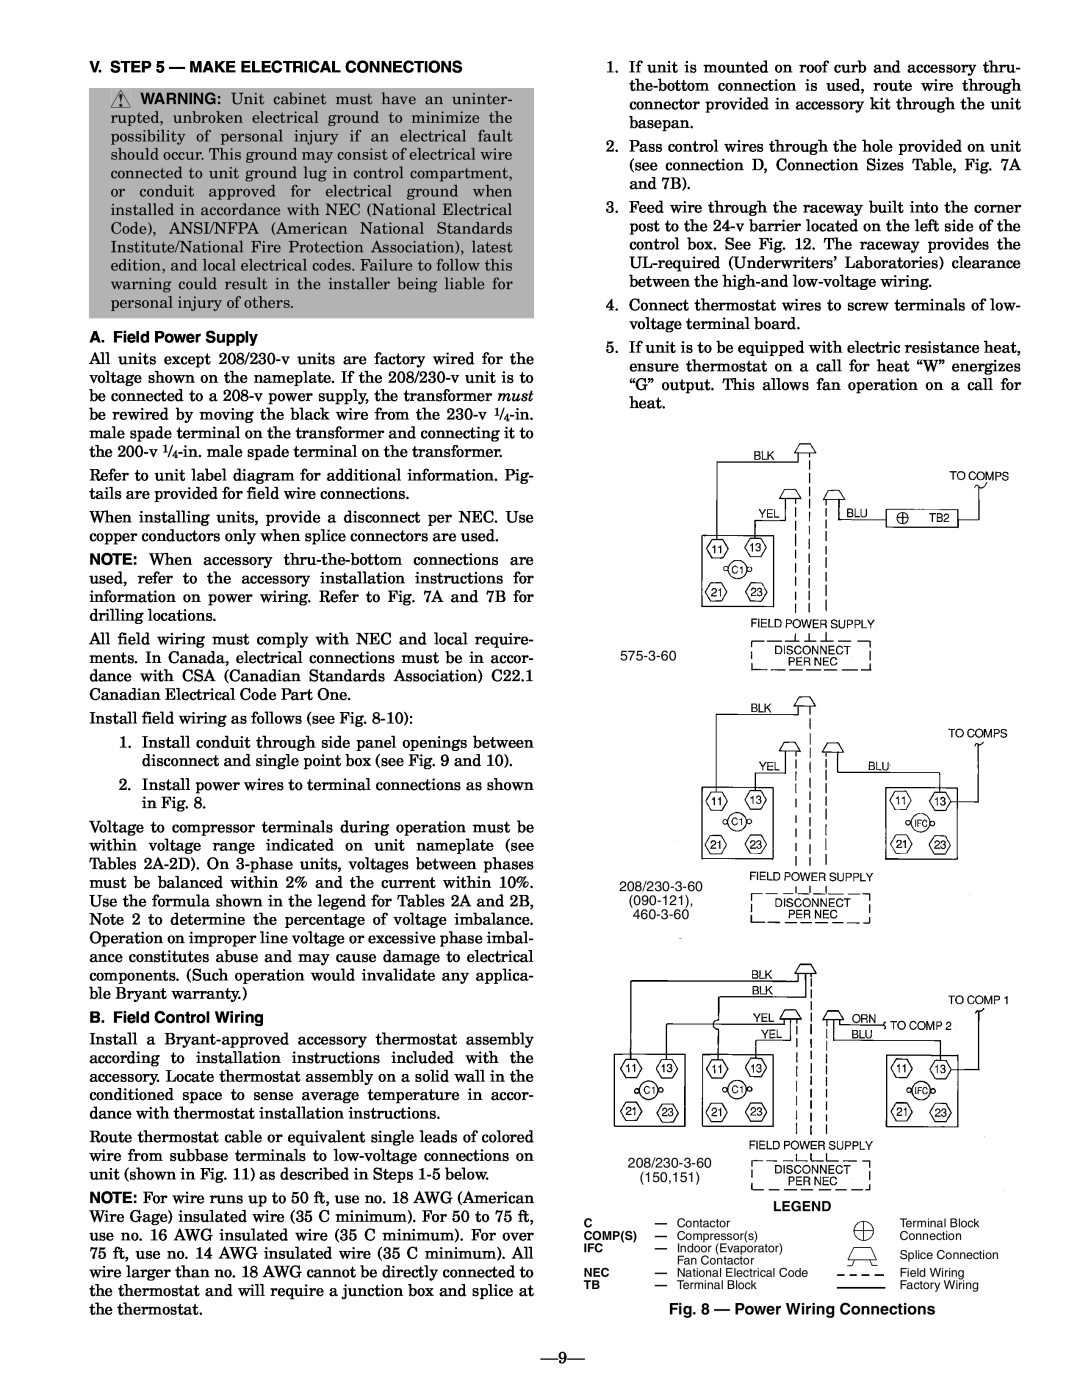 Bryant 558F V. - Make Electrical Connections, A. Field Power Supply, B. Field Control Wiring, Power Wiring Connections 